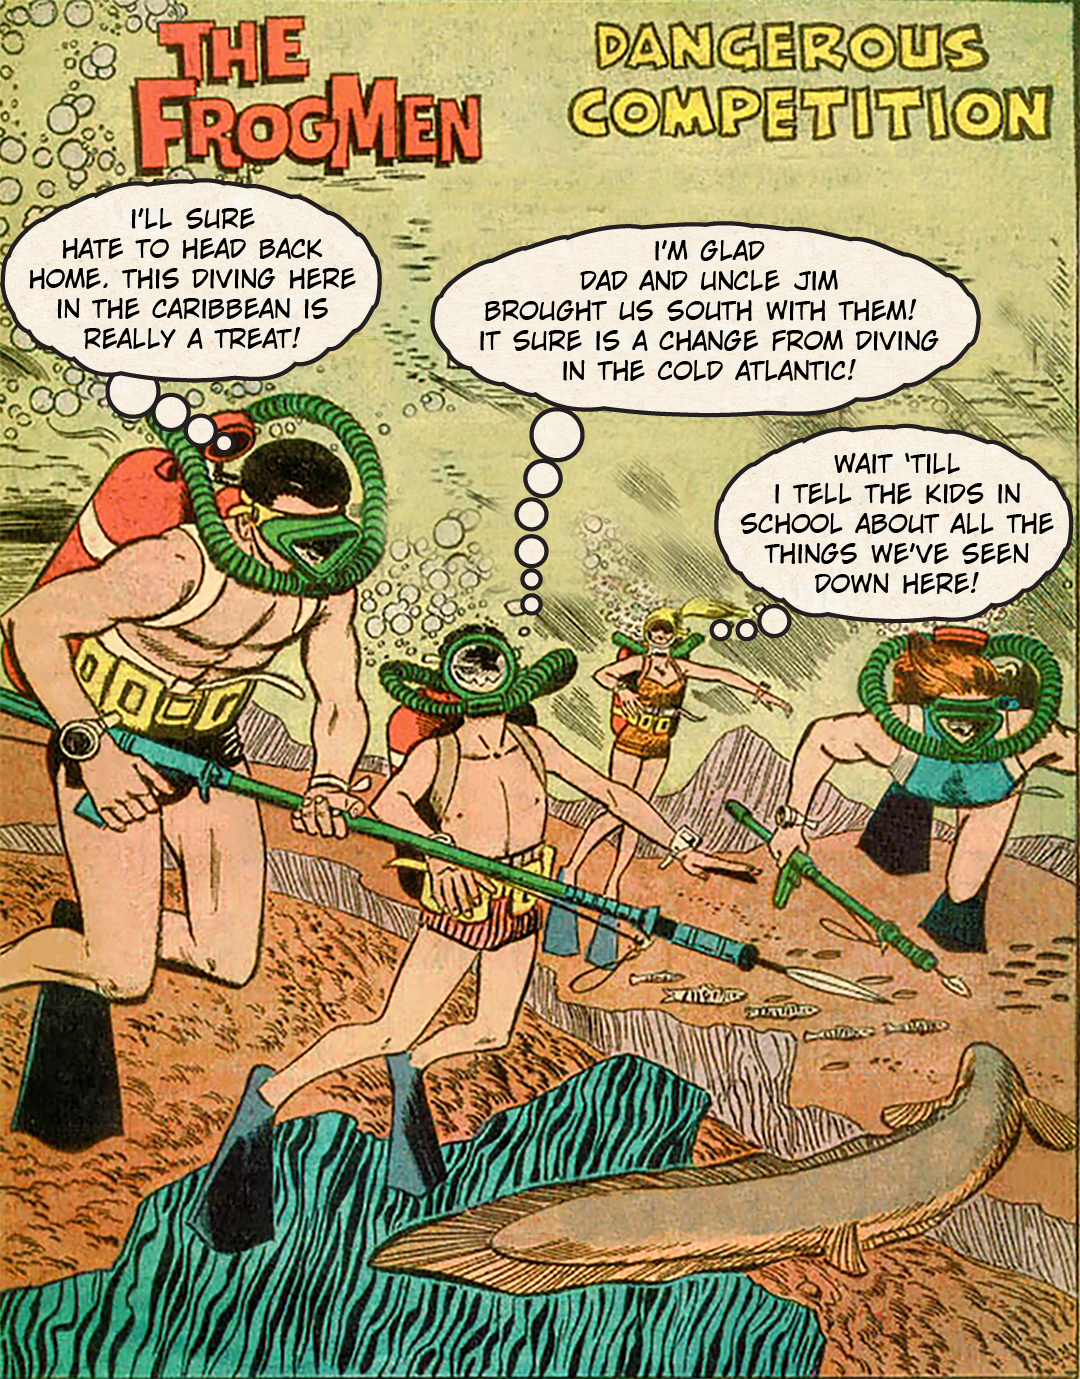 The Frogmen #1 - An Unusual Offer image number 2